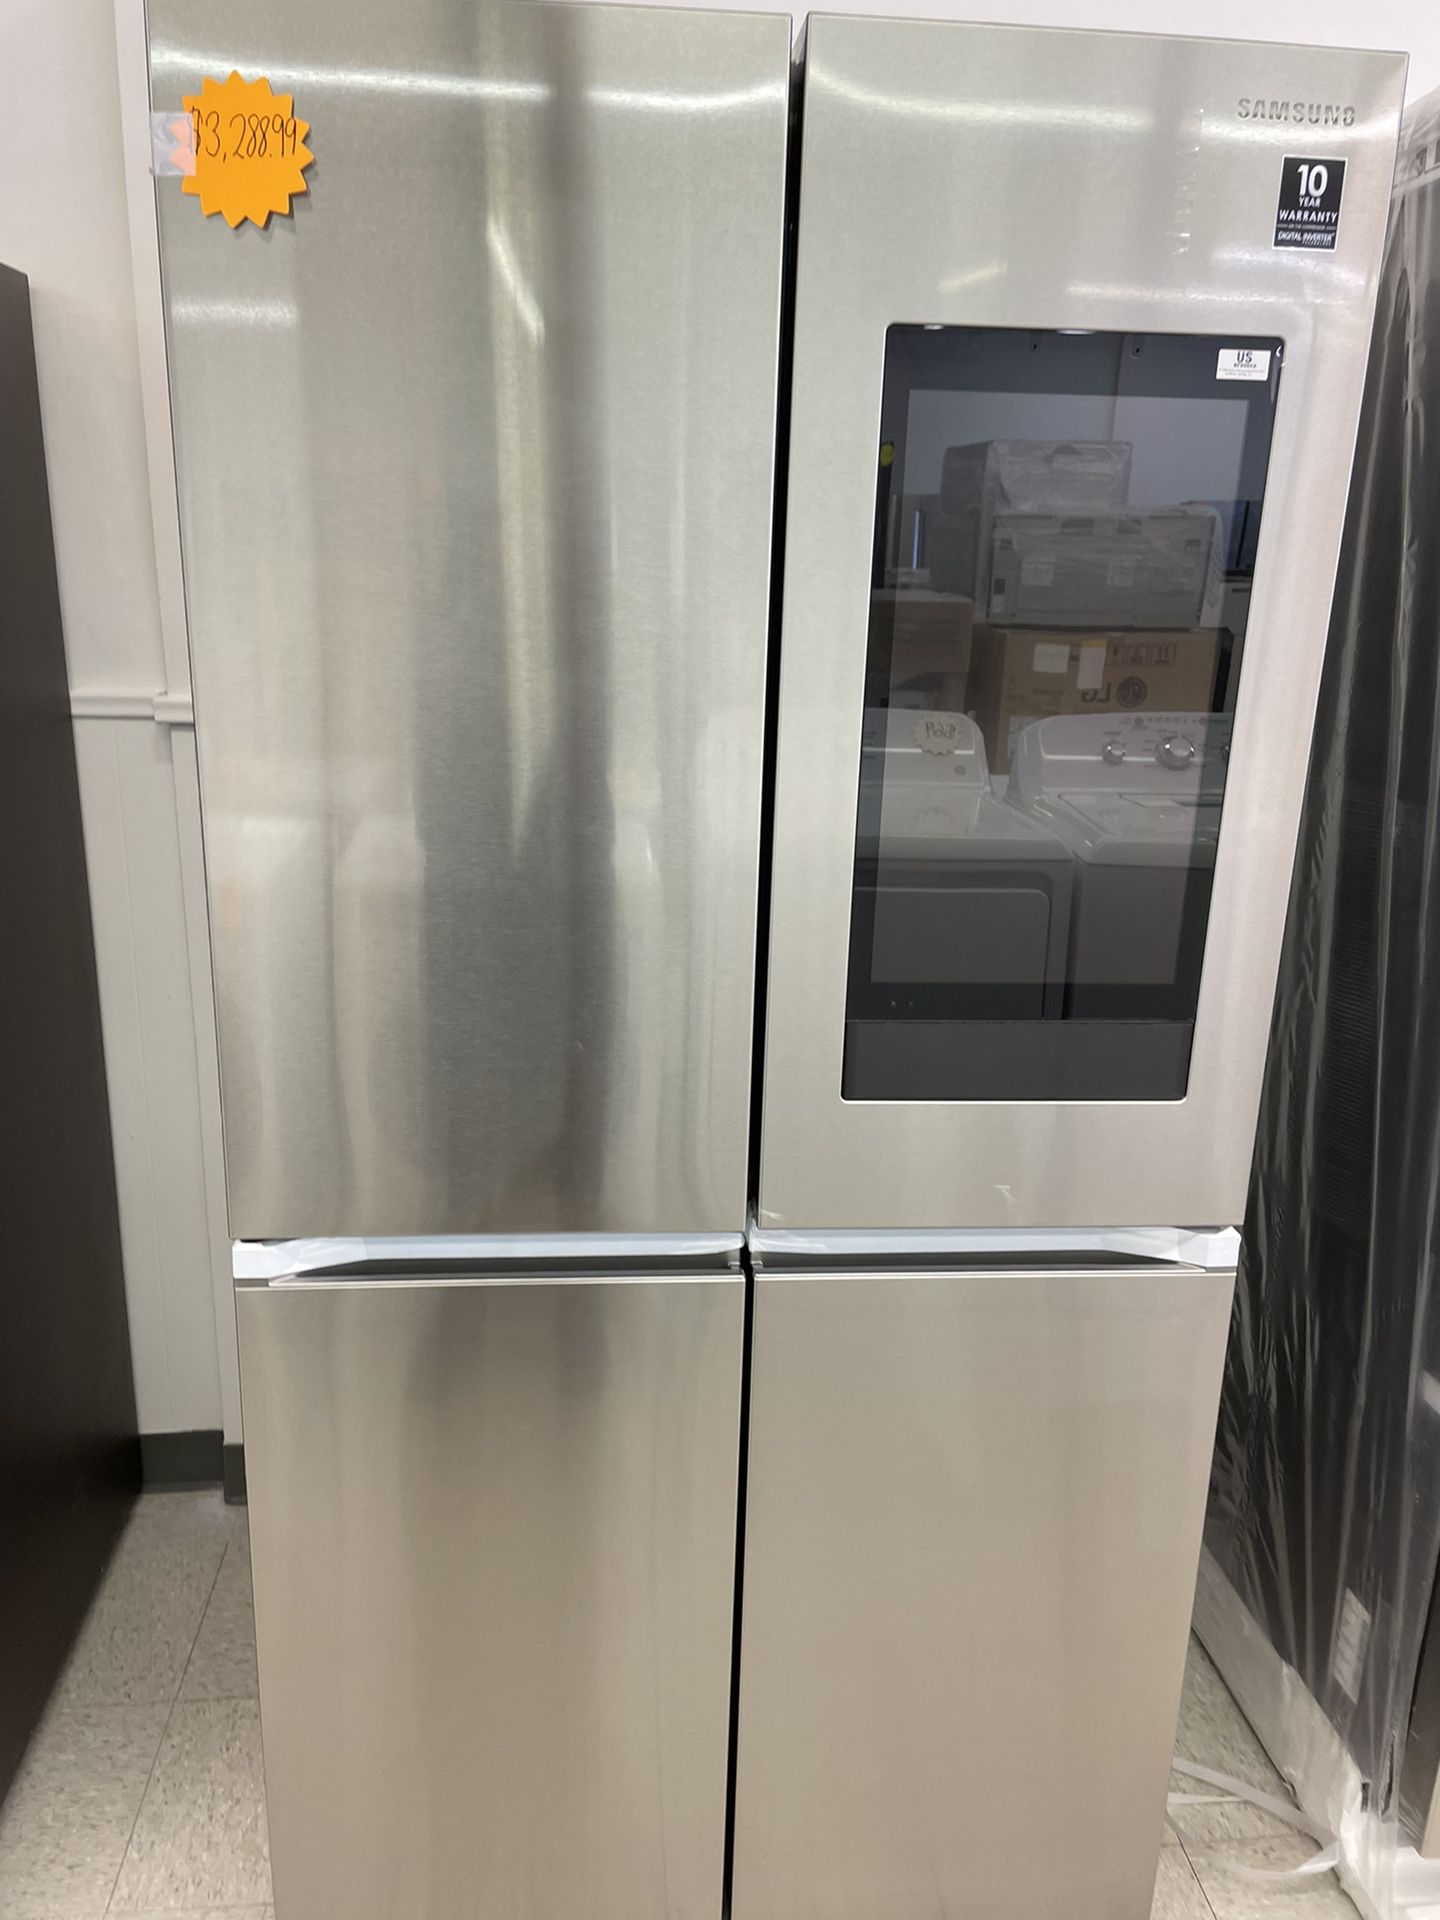 🥳Samsung Refrigerator with family hub and beverage center🥳